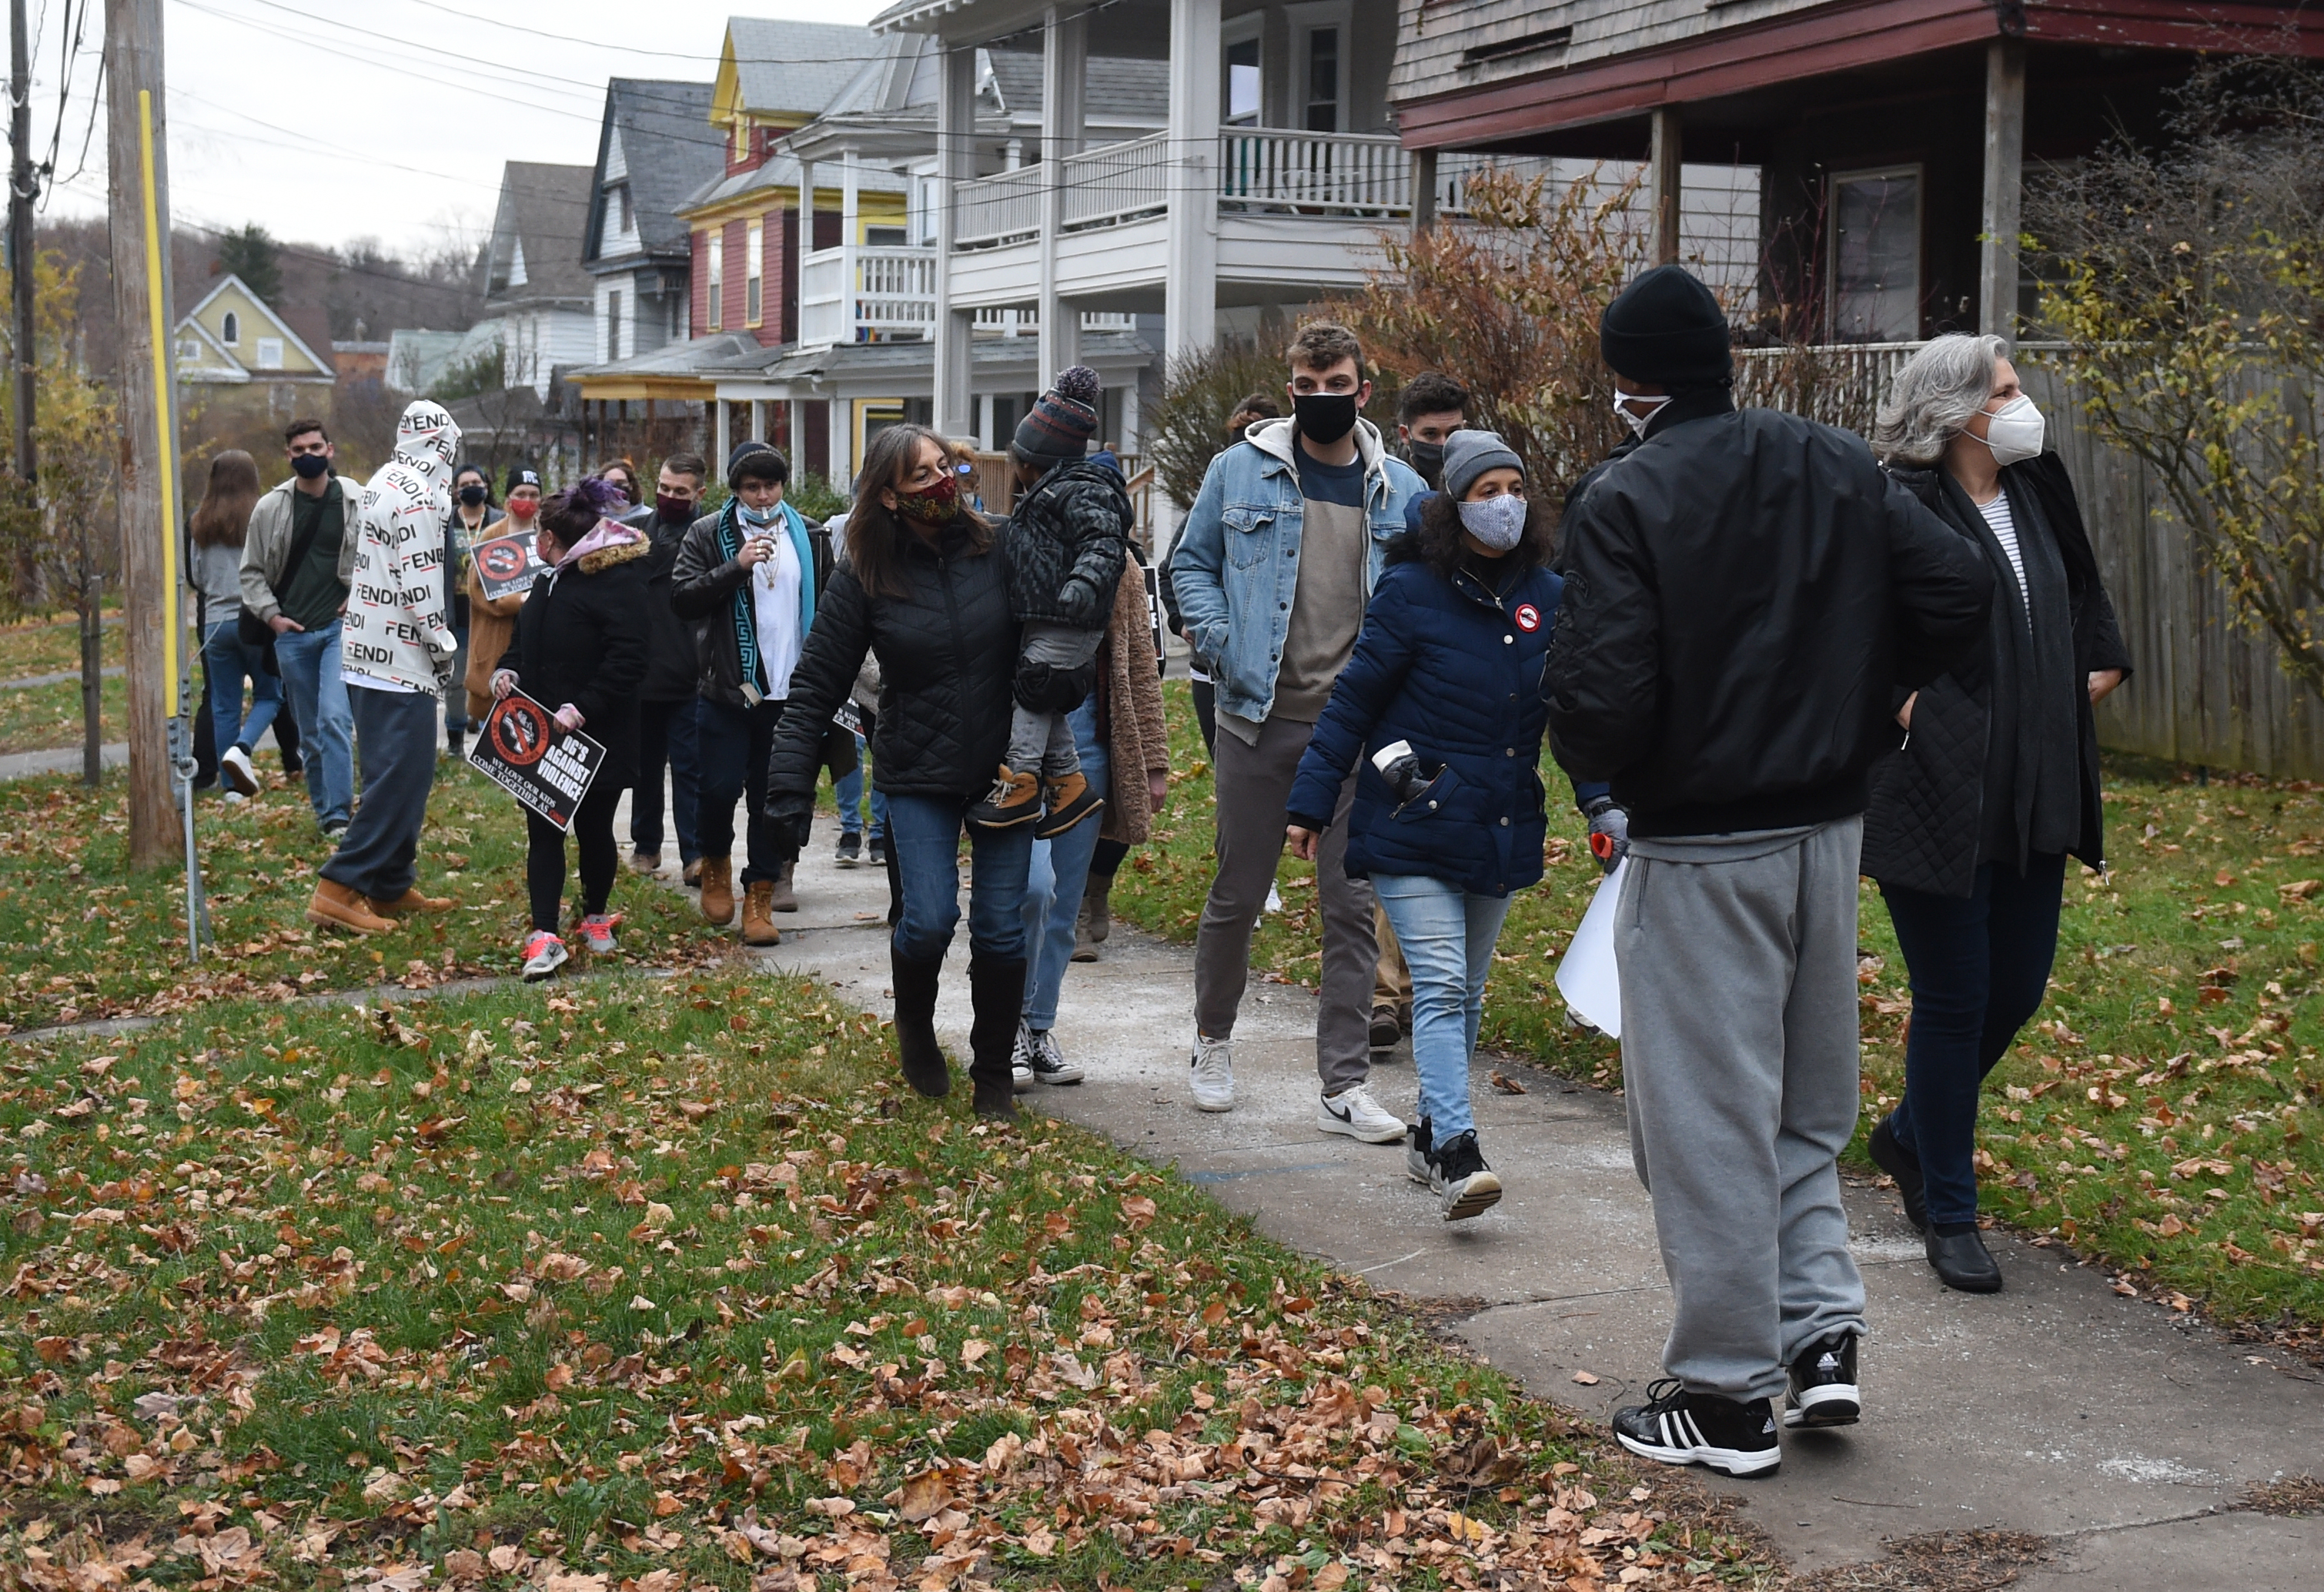 Friends and family march through Westcott from Jerry Murray's murder scene on Judson Street to gather at his mothers home on Trinity Place, Syracuse, N.Y., Saturday, November 21, 2020.